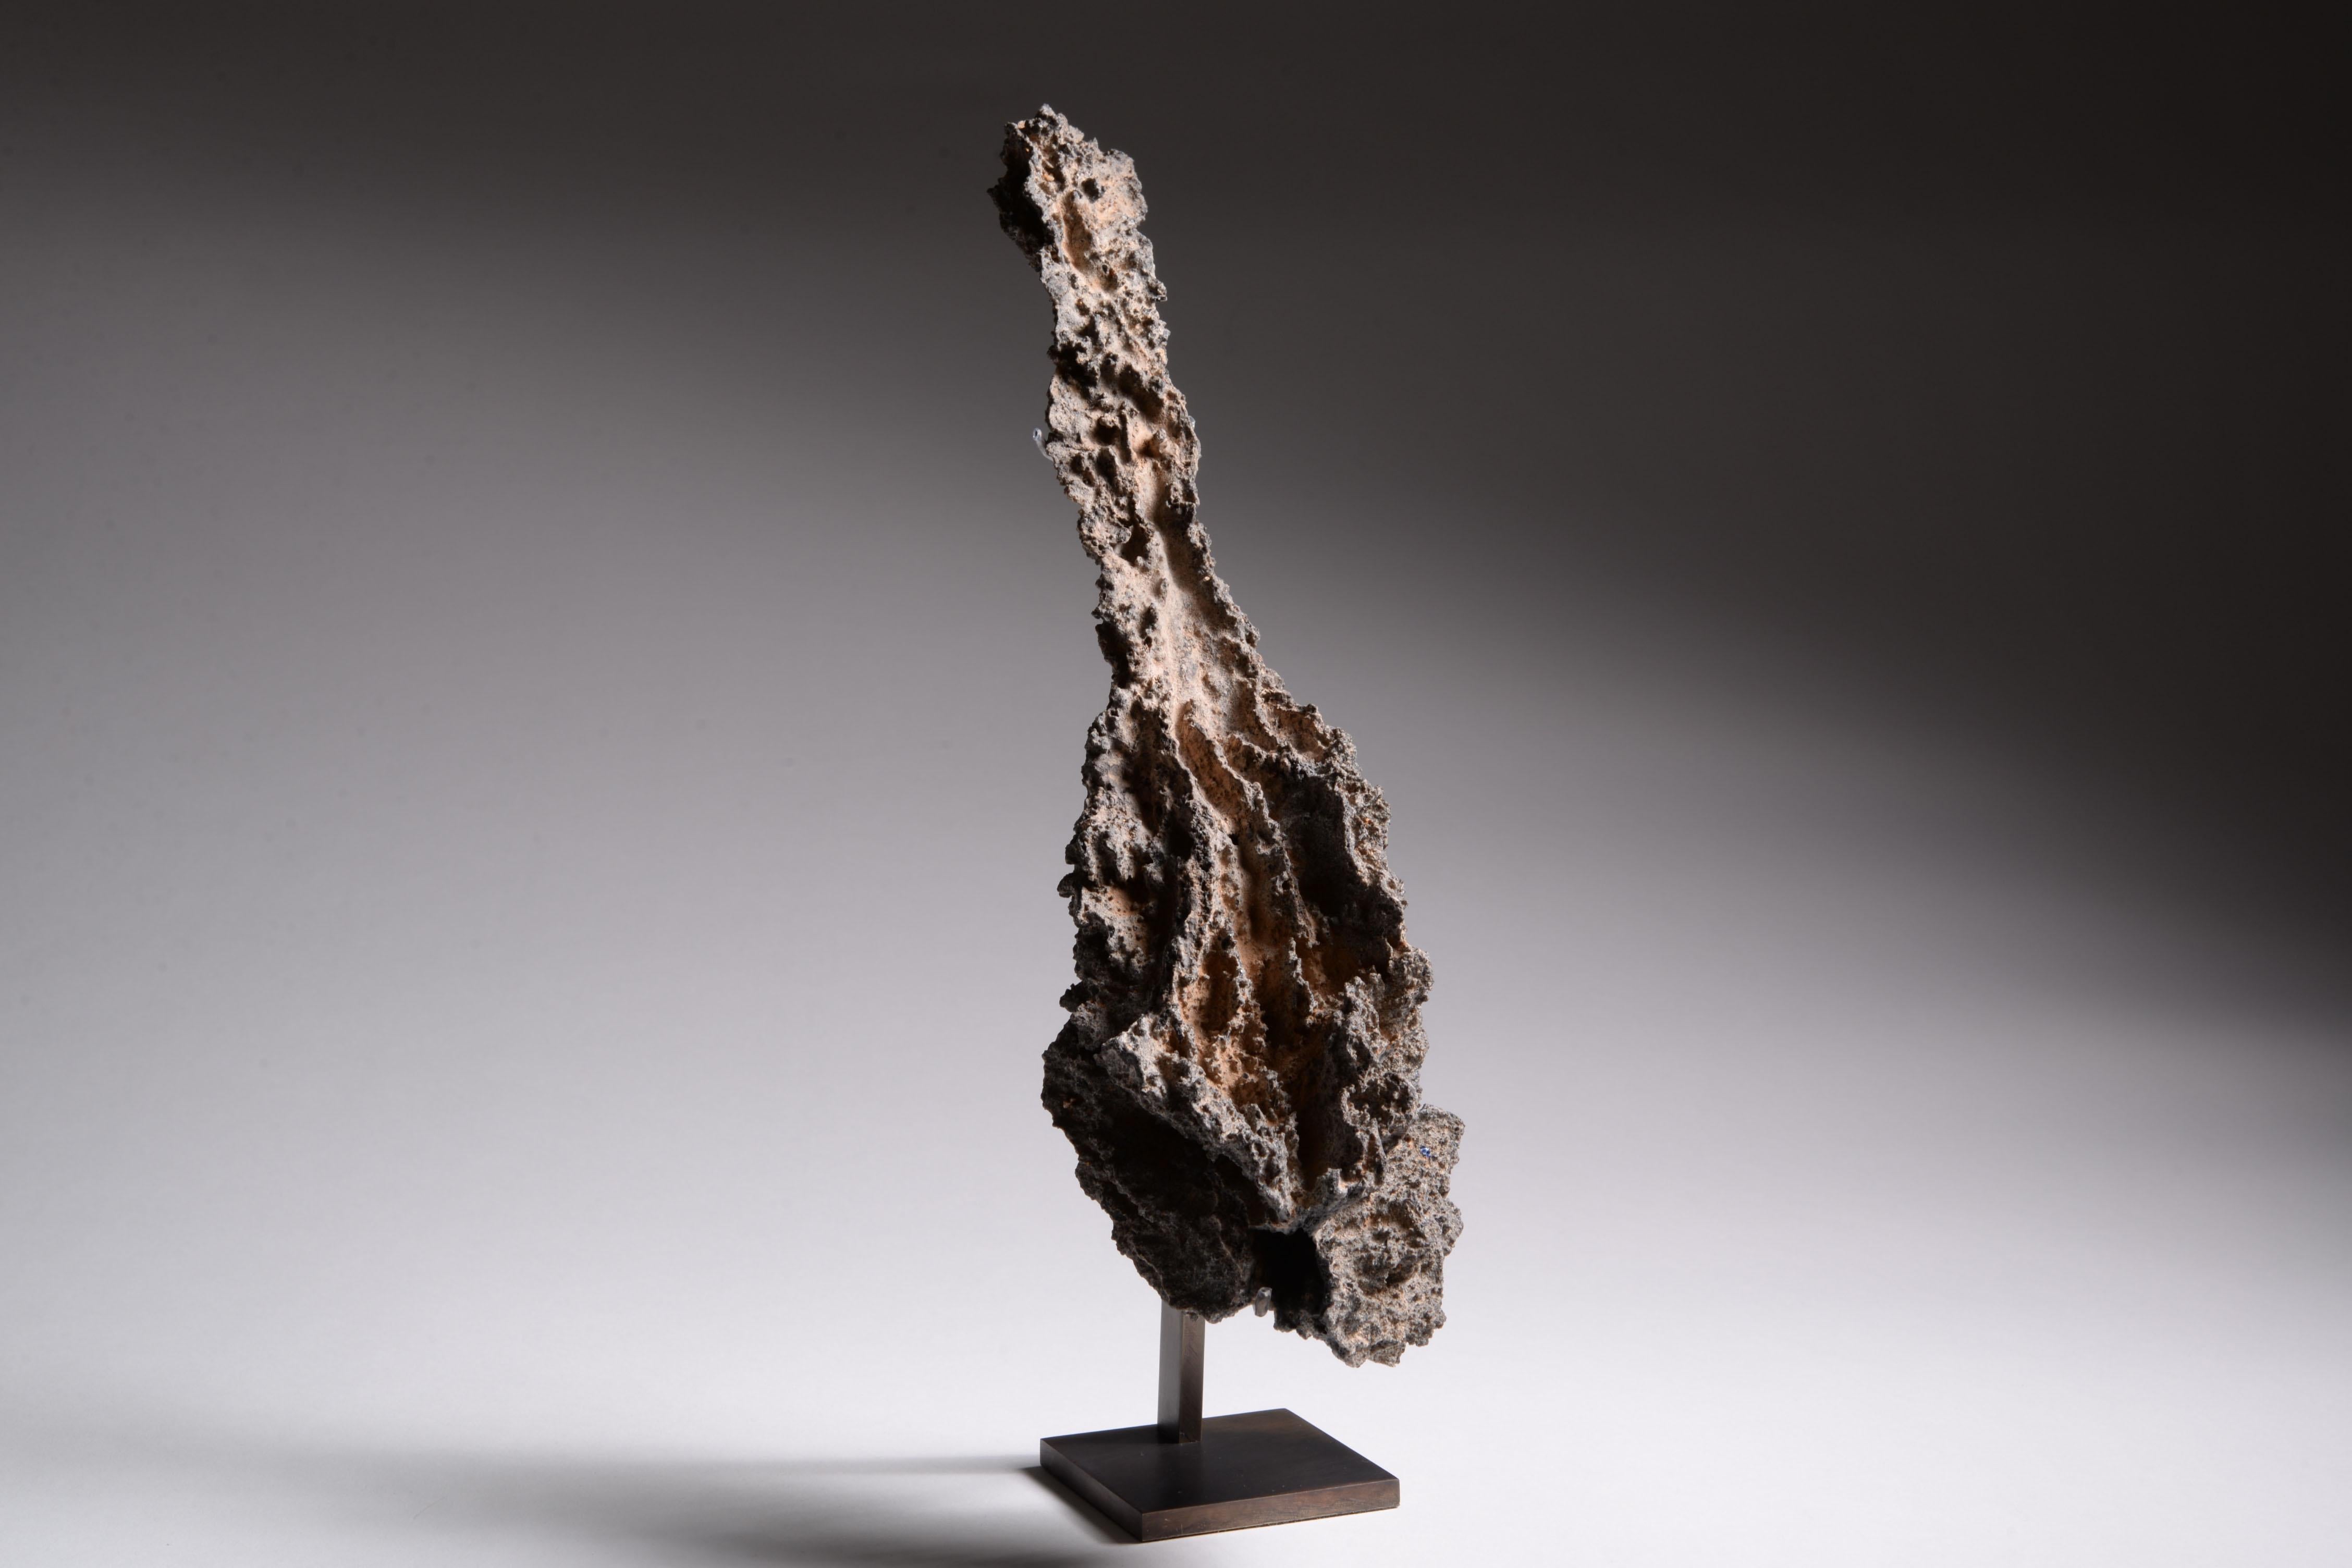 An Extraordinarily well preserved specimen of Fulgurite
Tubular Lechatetierite
Formation date unknown, recovered from the Sahara Desert, Algeria, circa 2006

This remarkable natural sculpture was formed in one ten thousandth of a second, from